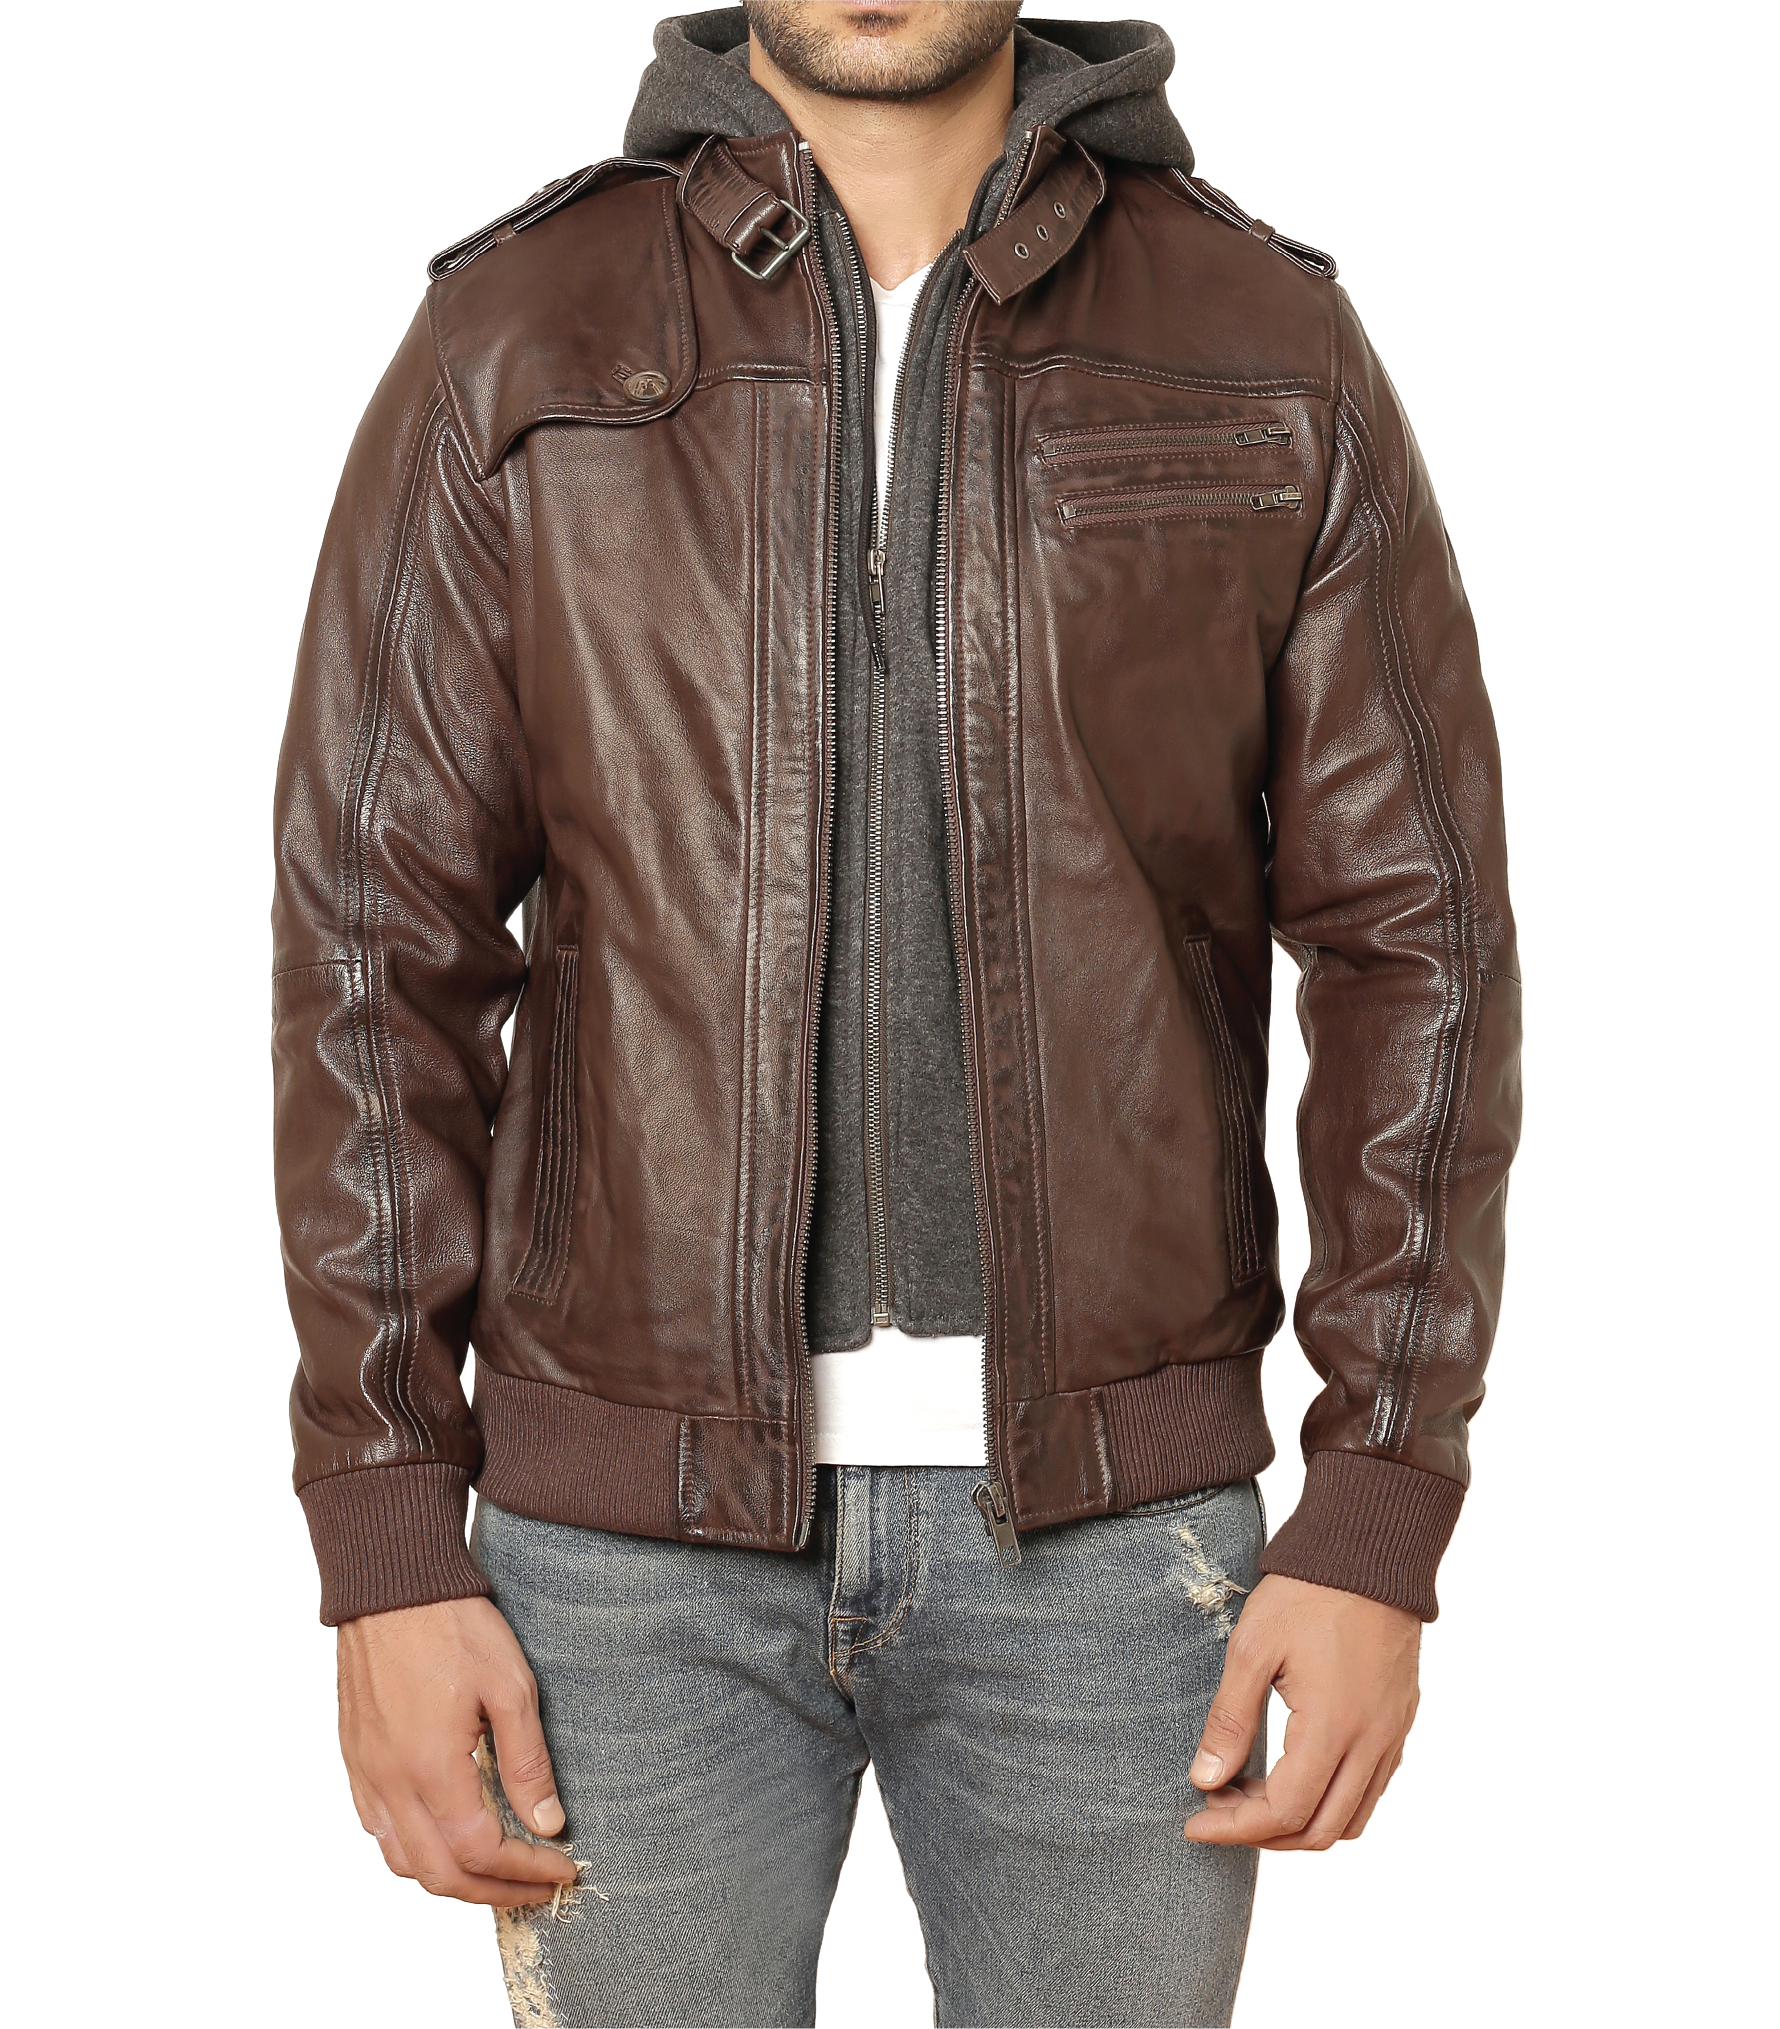 Hood Leather Jackets – Sims Leather